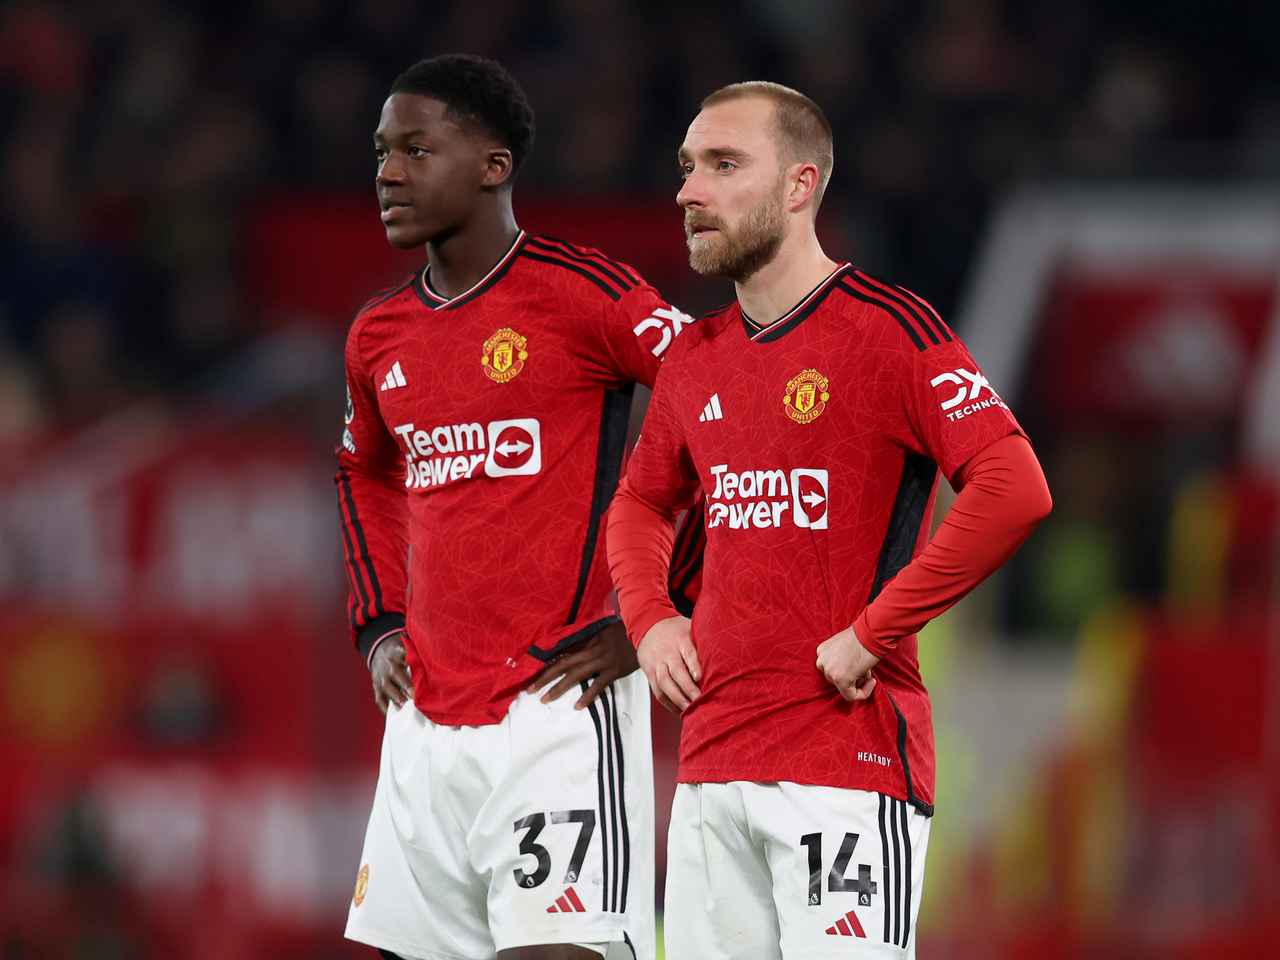 Christian Eriksen probably feels surplus to requirements at Manchester United mostly due to the emergence of Kobbie Mainoo.